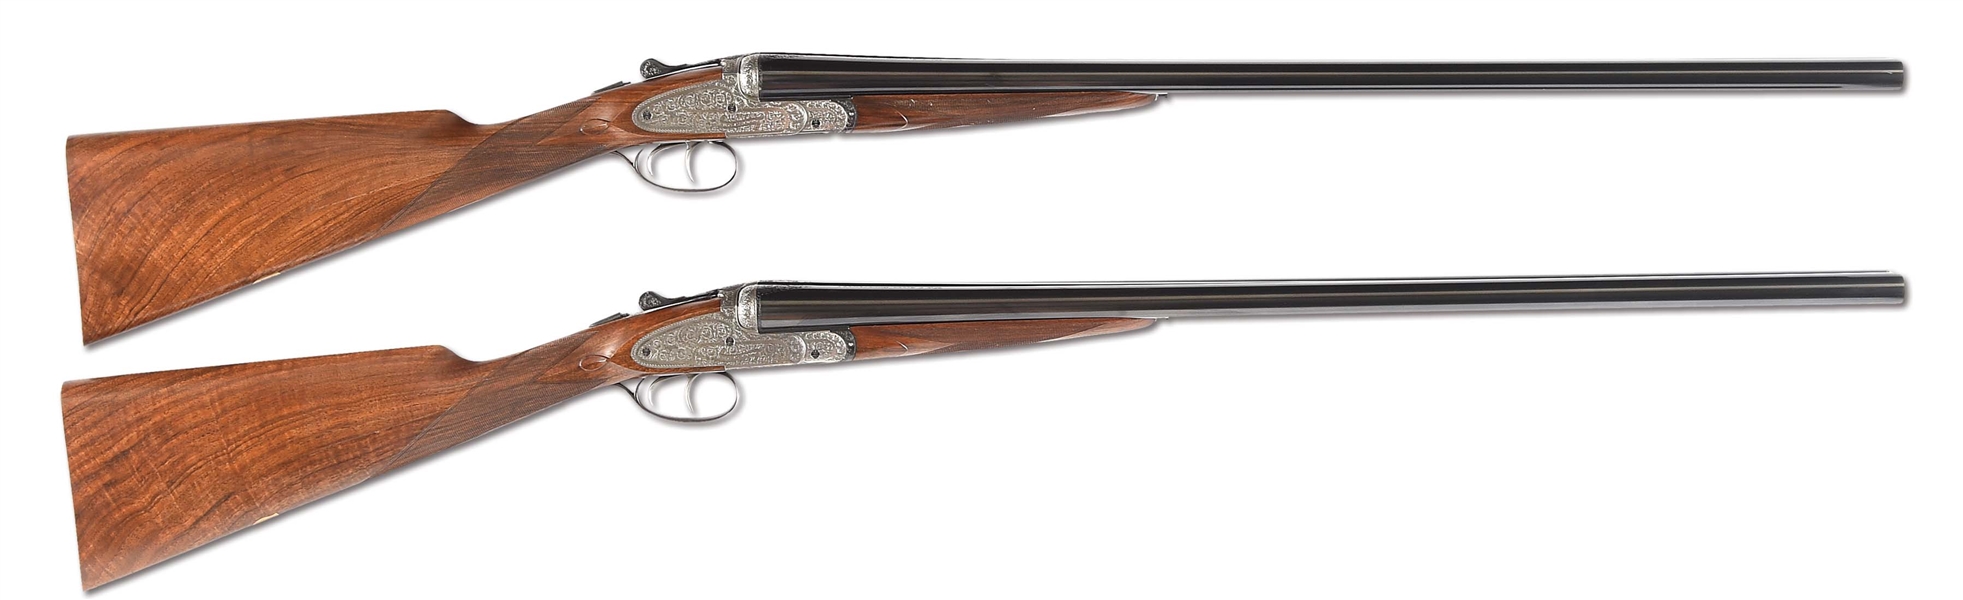 (C) MATCHED PAIR OF W. & C. SCOTT "CHATSWORTH" SIDEPLATED BOXLOCK EJECTOR GAME GUNS IN THEIR ORIGINAL  CASE. 